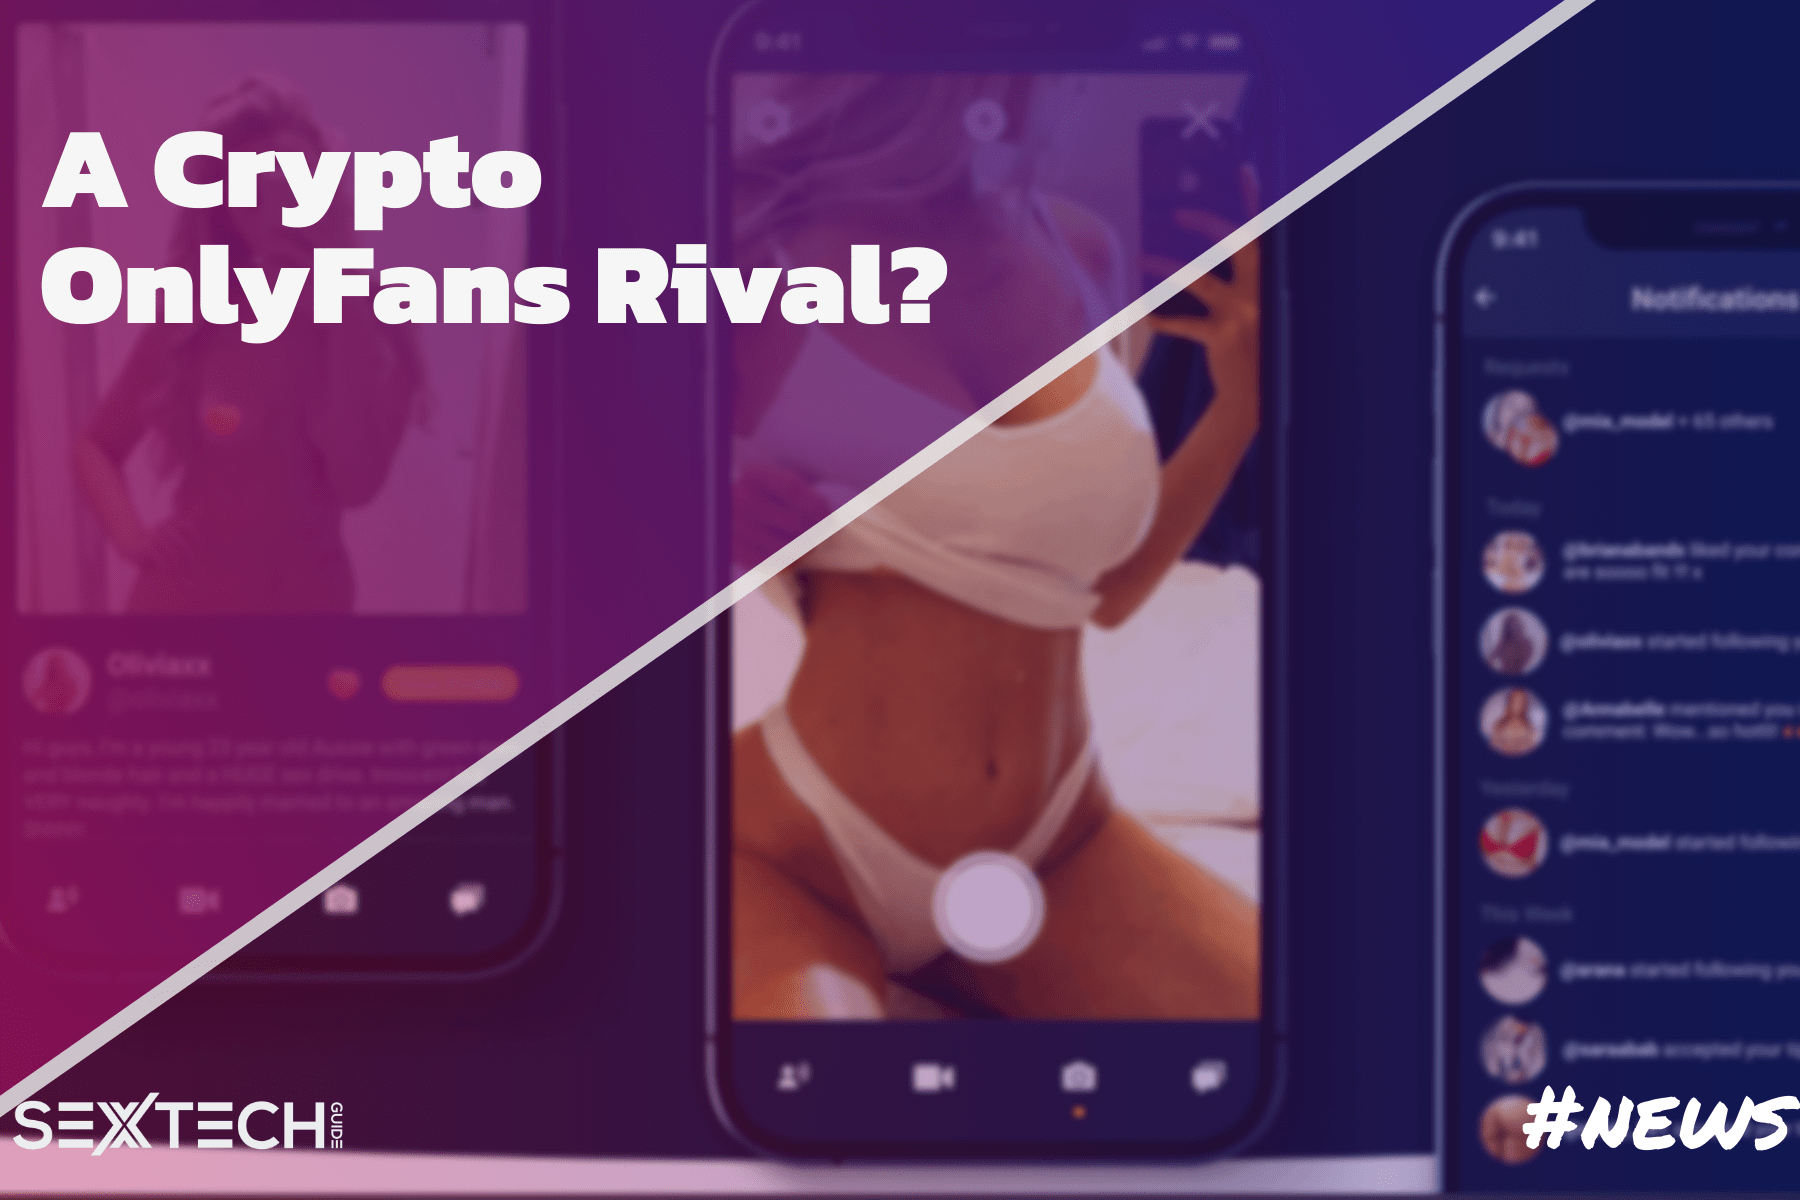 PornRocket wants to be a crypto based rival to OnlyFans